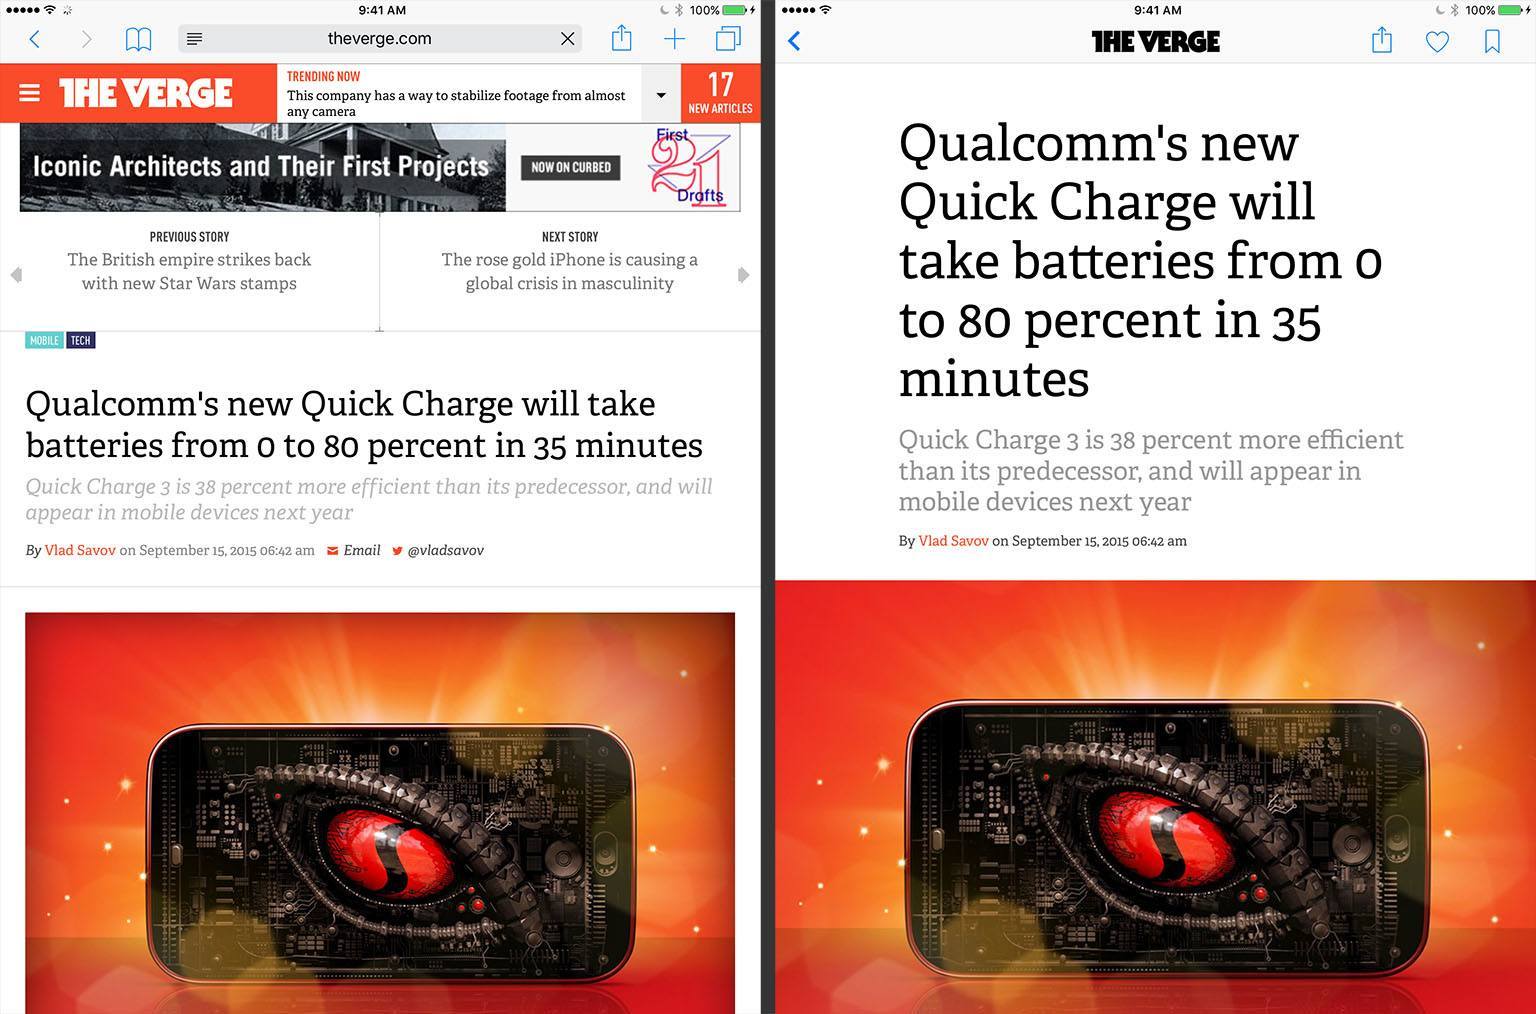 Reading an article from The Verge on their website (left) and in News (right)